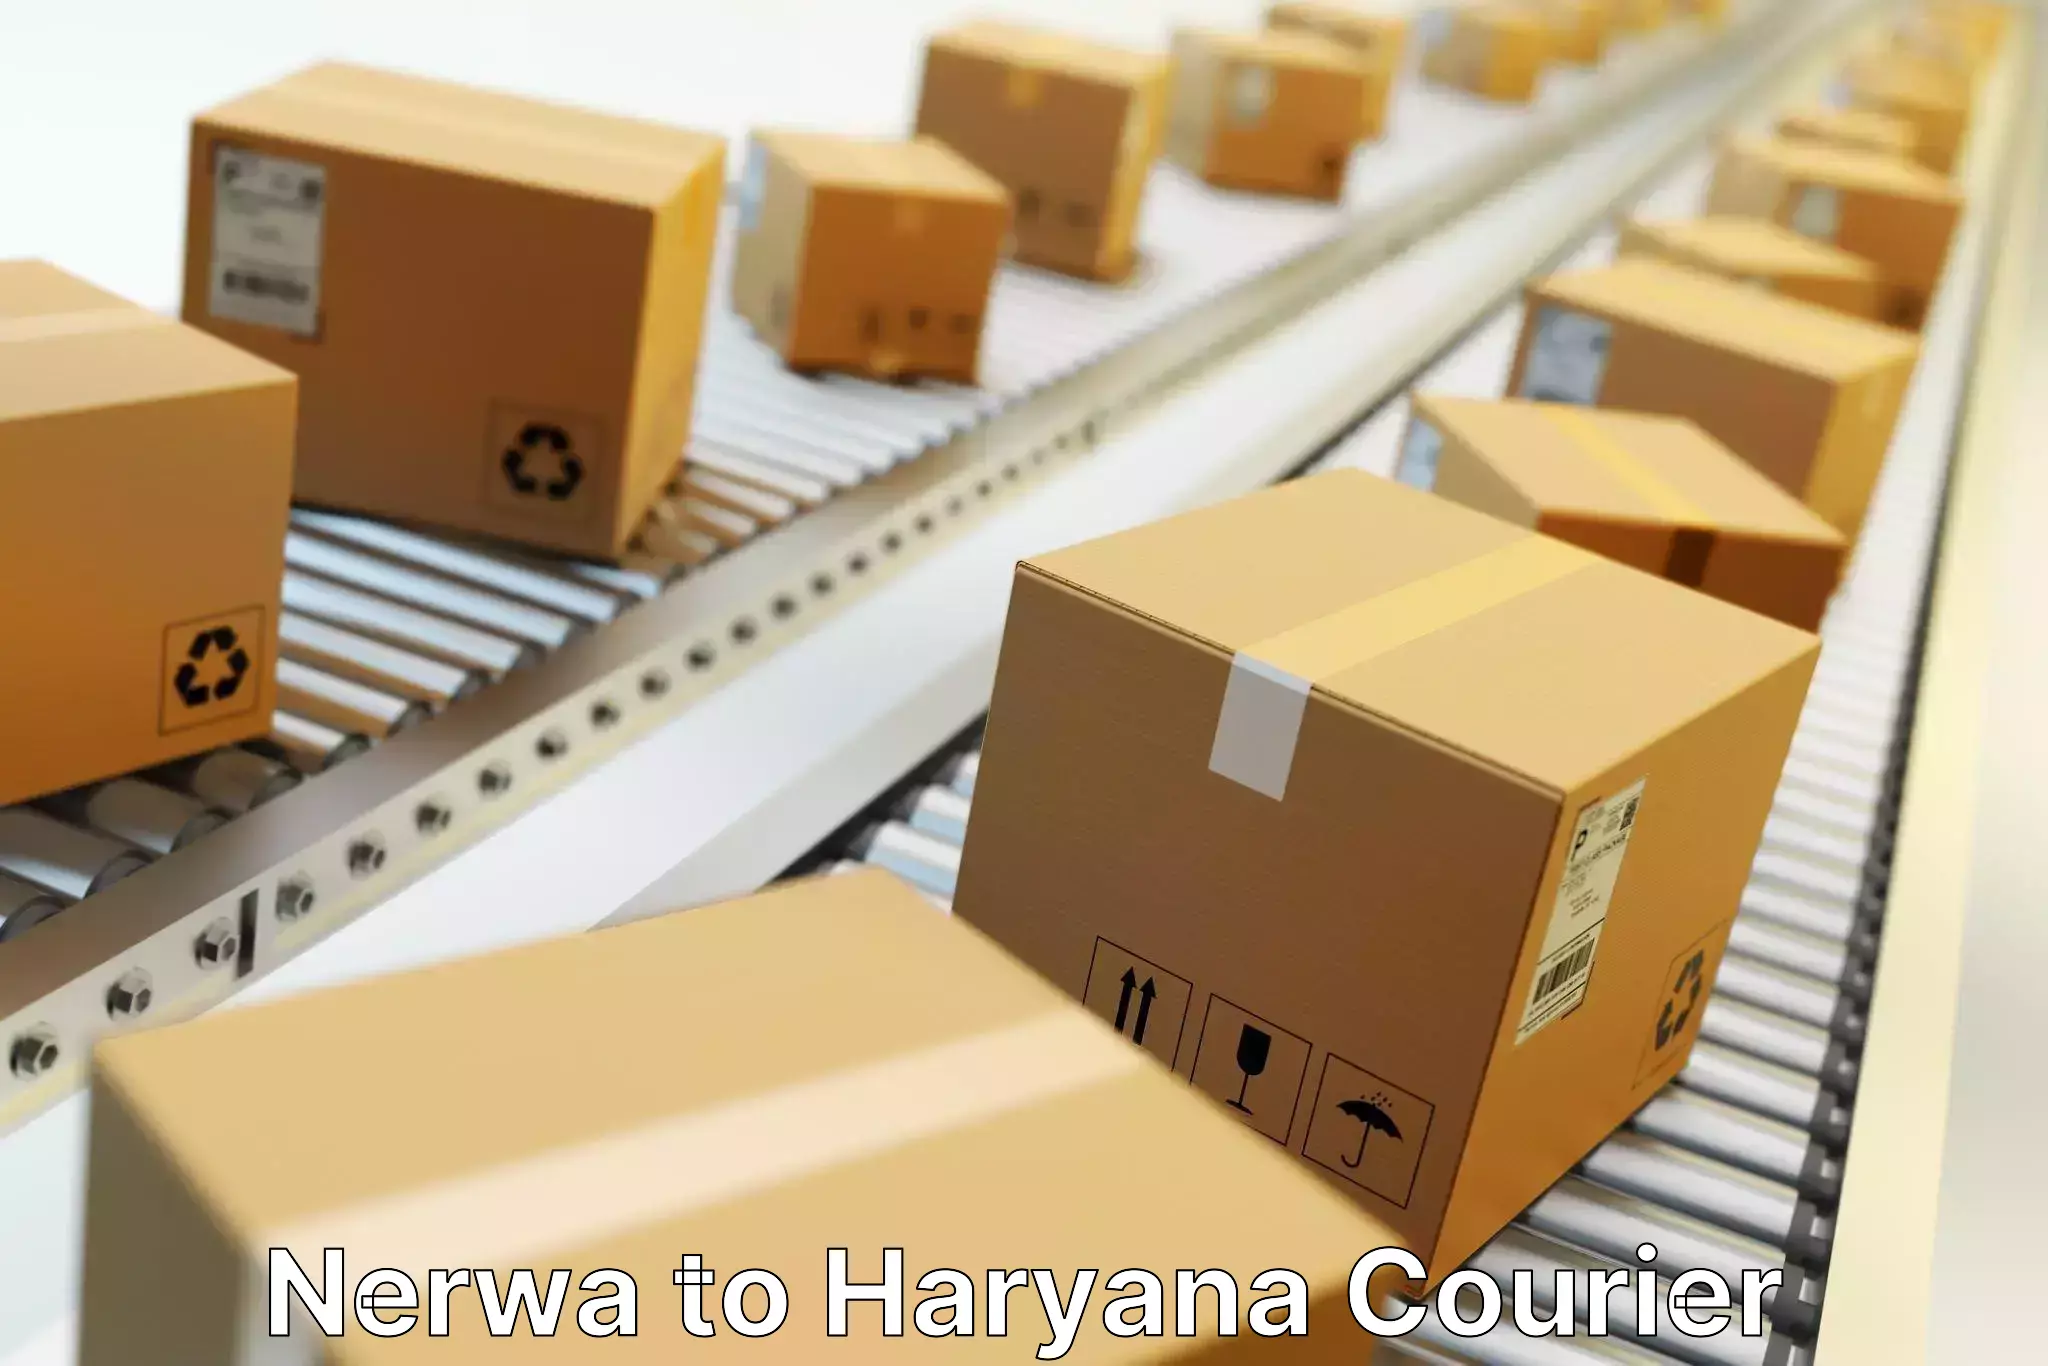 Global courier networks Nerwa to Chaudhary Charan Singh Haryana Agricultural University Hisar